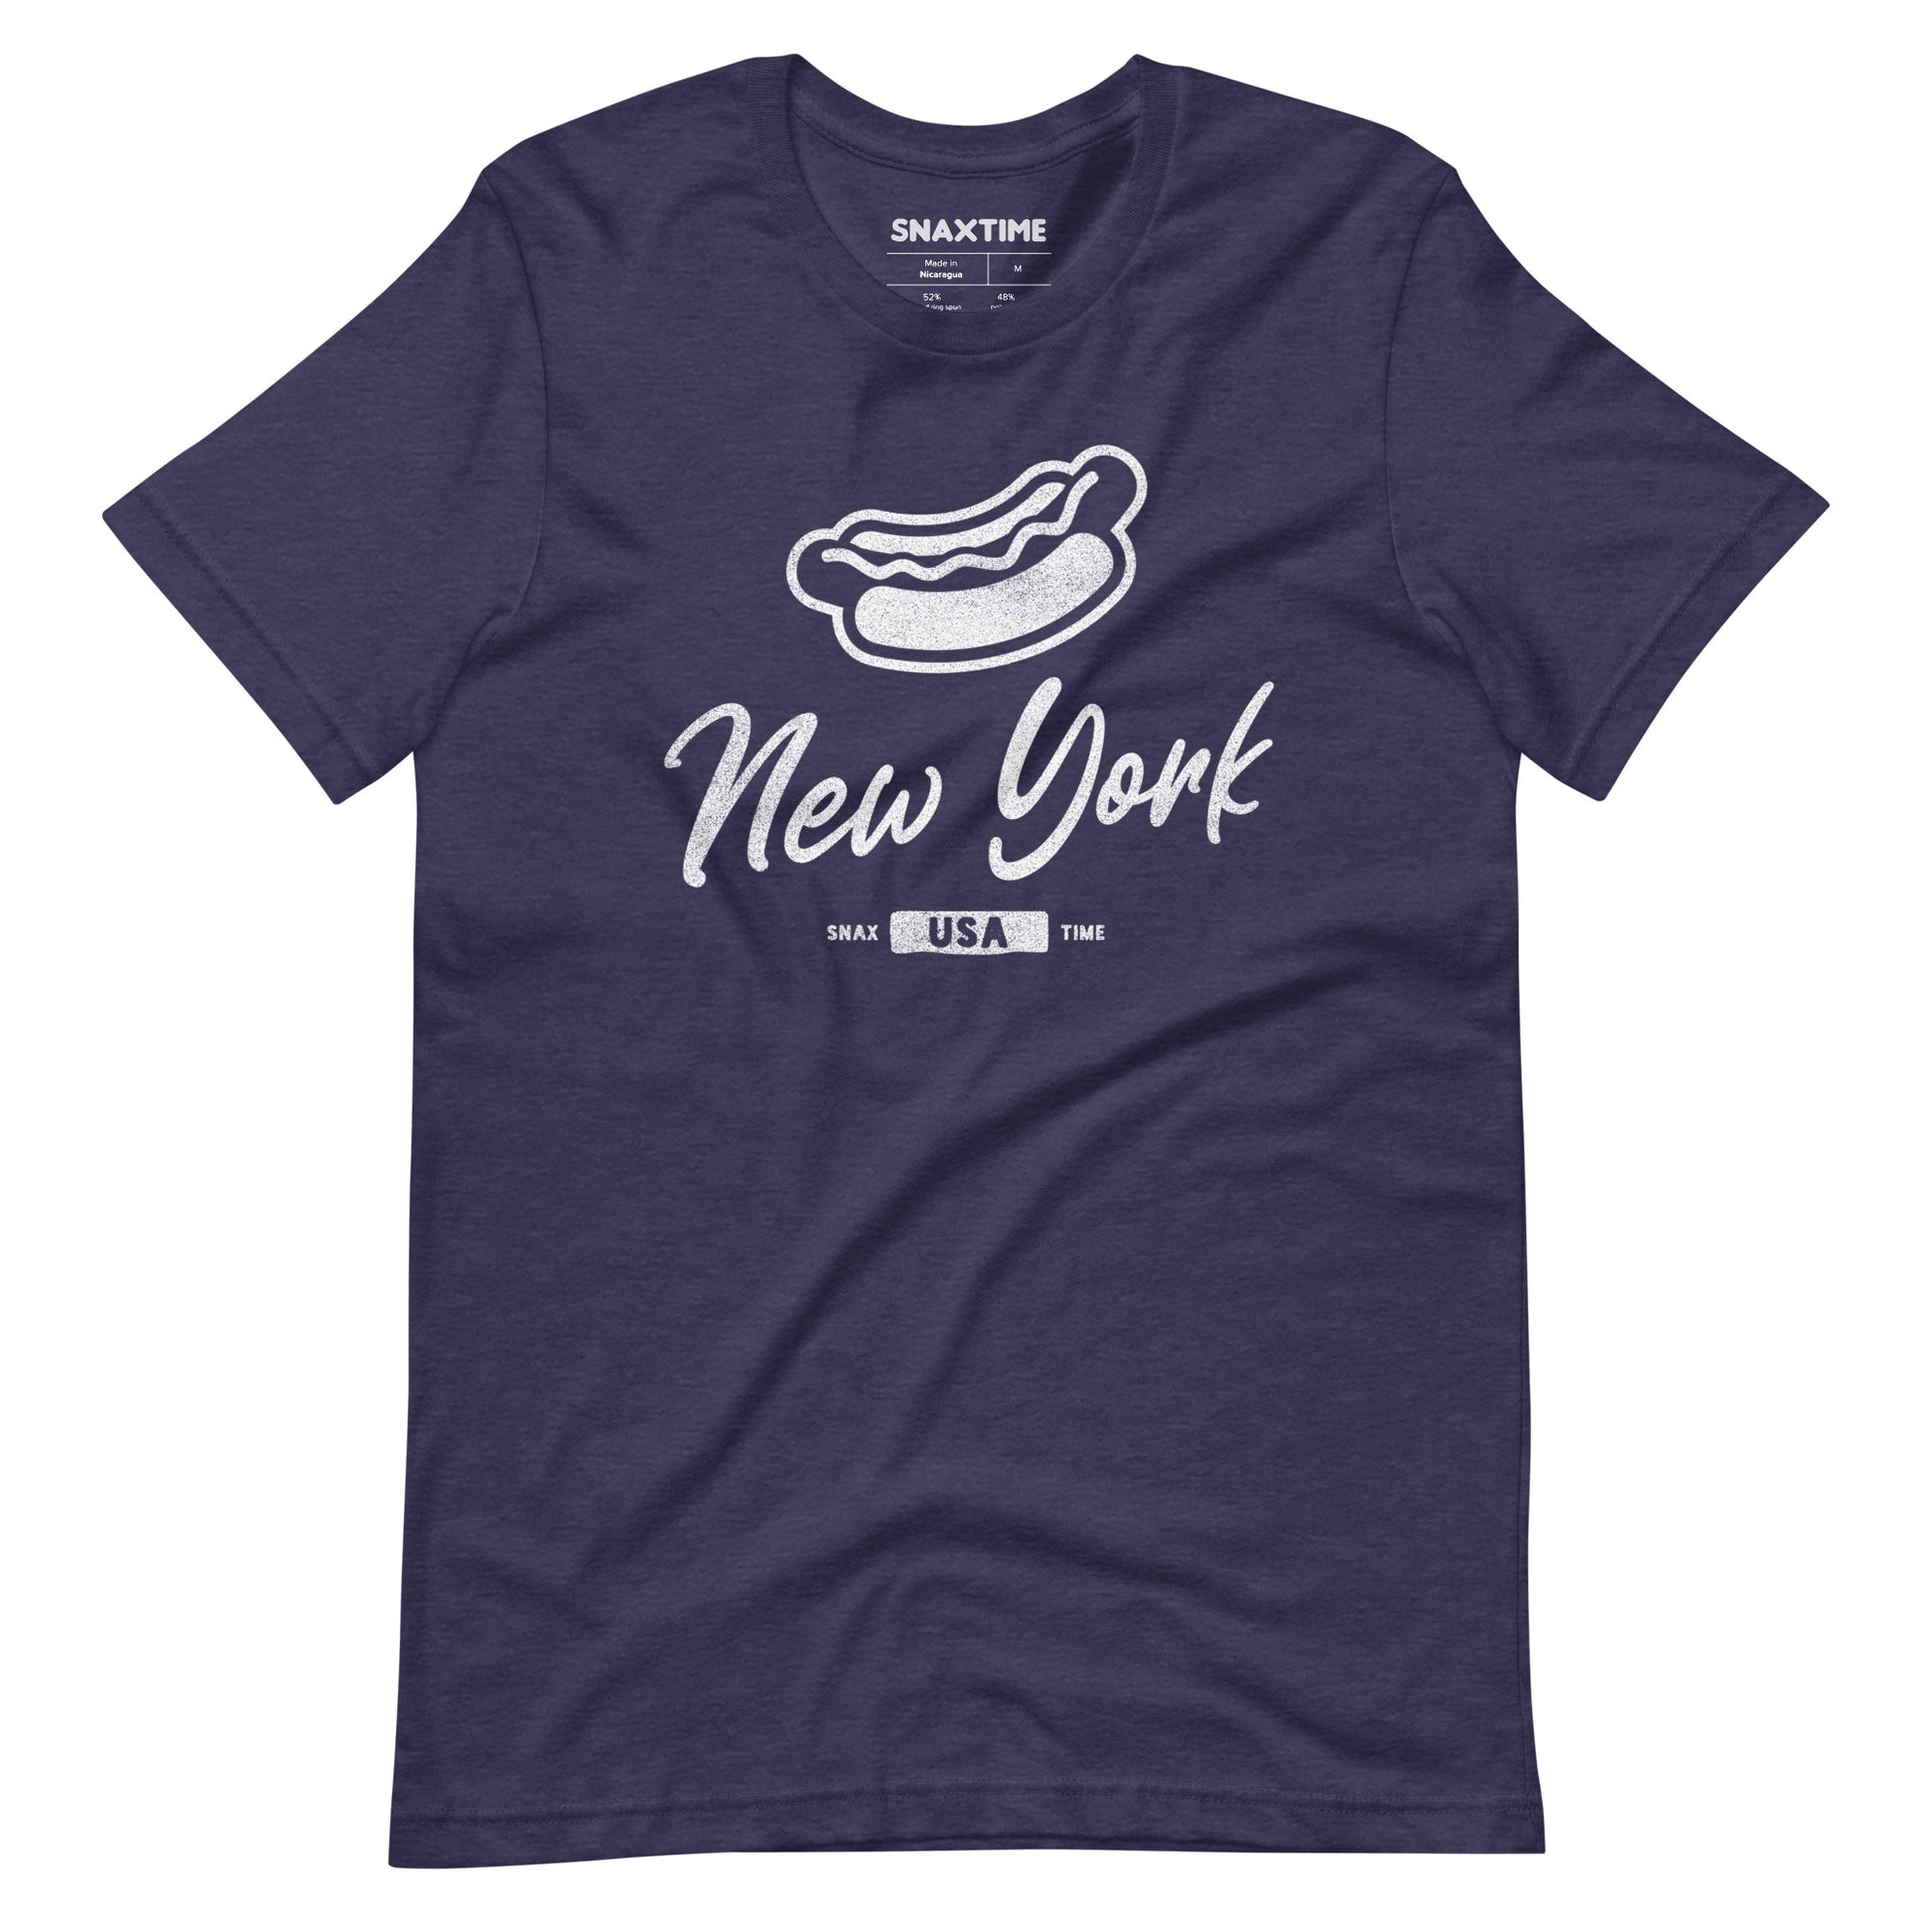 Heather Midnight Navy New York City Hot Dog Graphic T-Shirt by Snaxtime